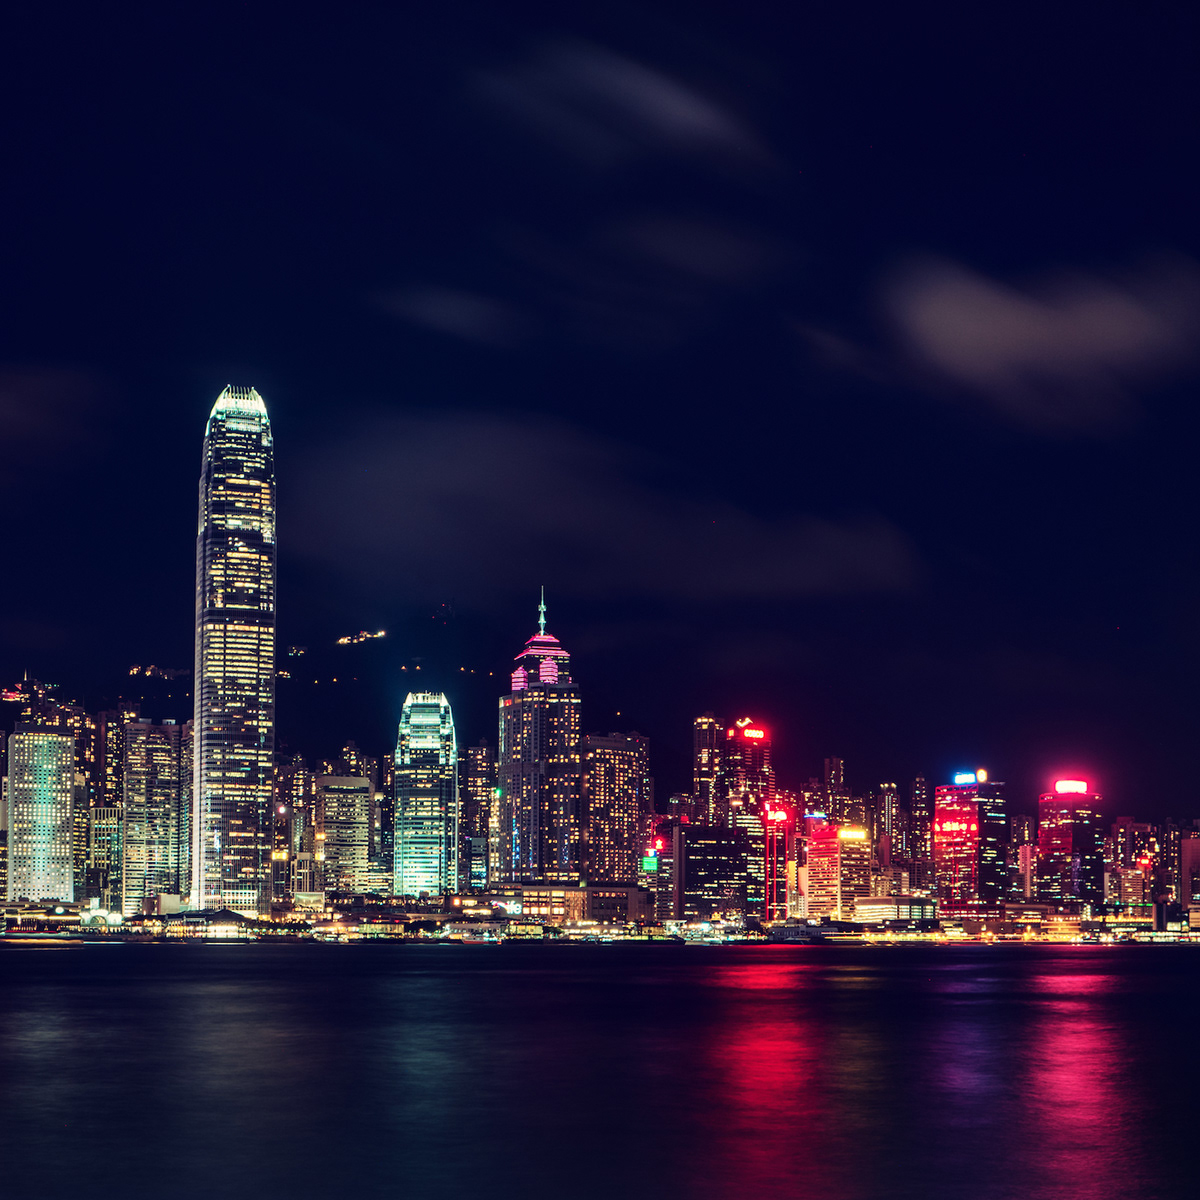 cityscape Hong Kong Photography  Time Lapse timelapse Urban videography Architecture Photography street photography travel photography